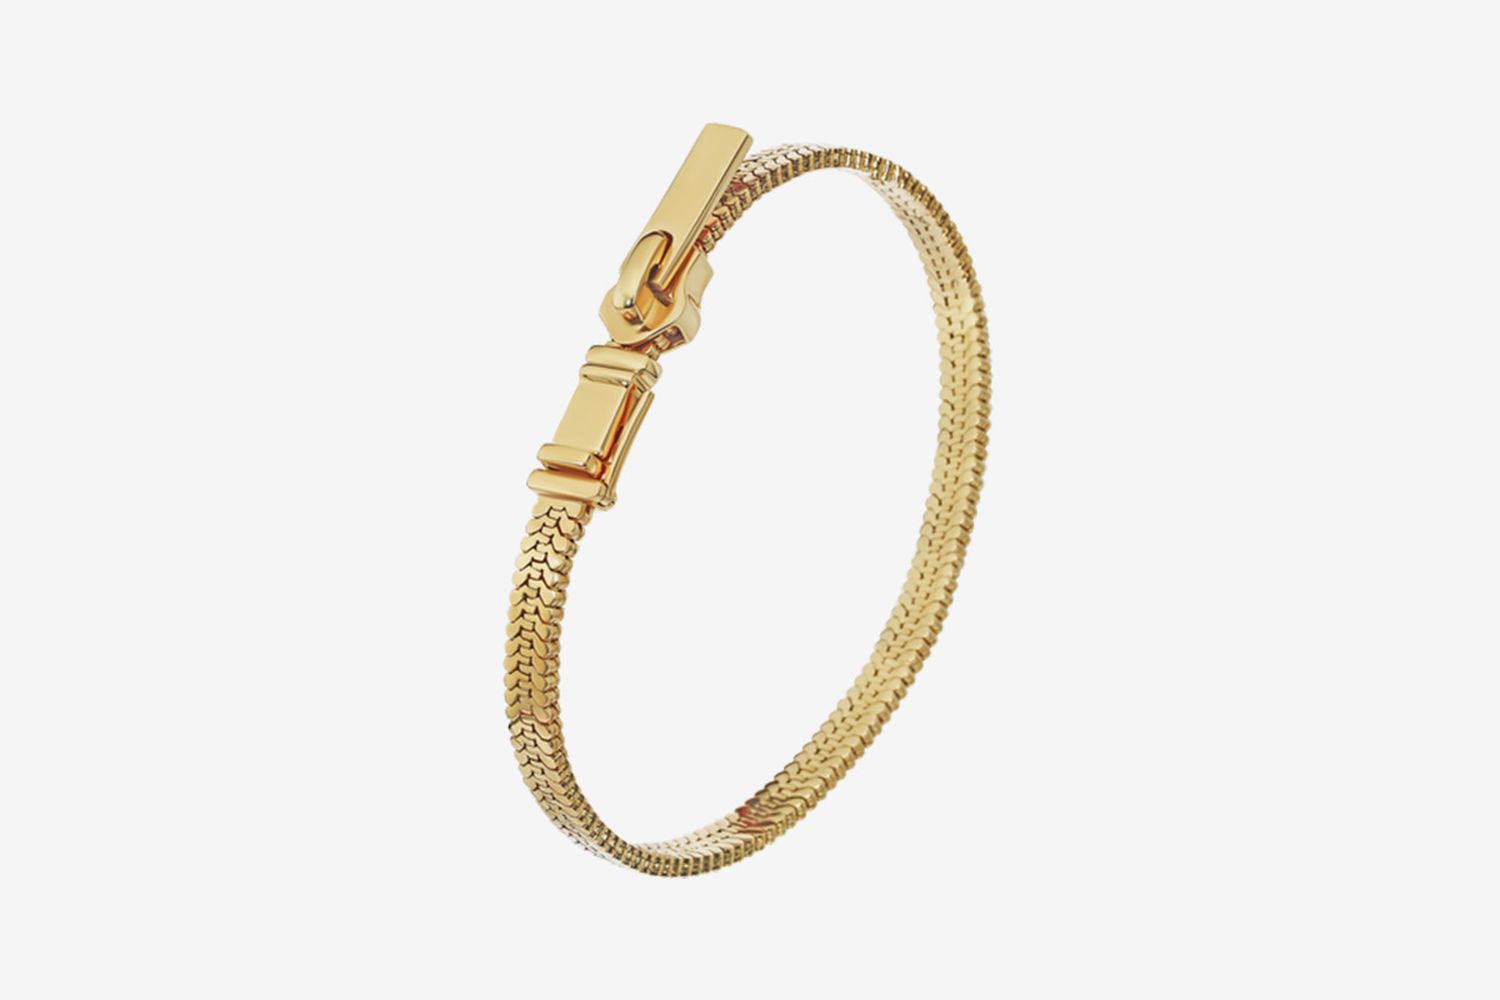 Shop 11 Investment Bracelets to Buy in 2023